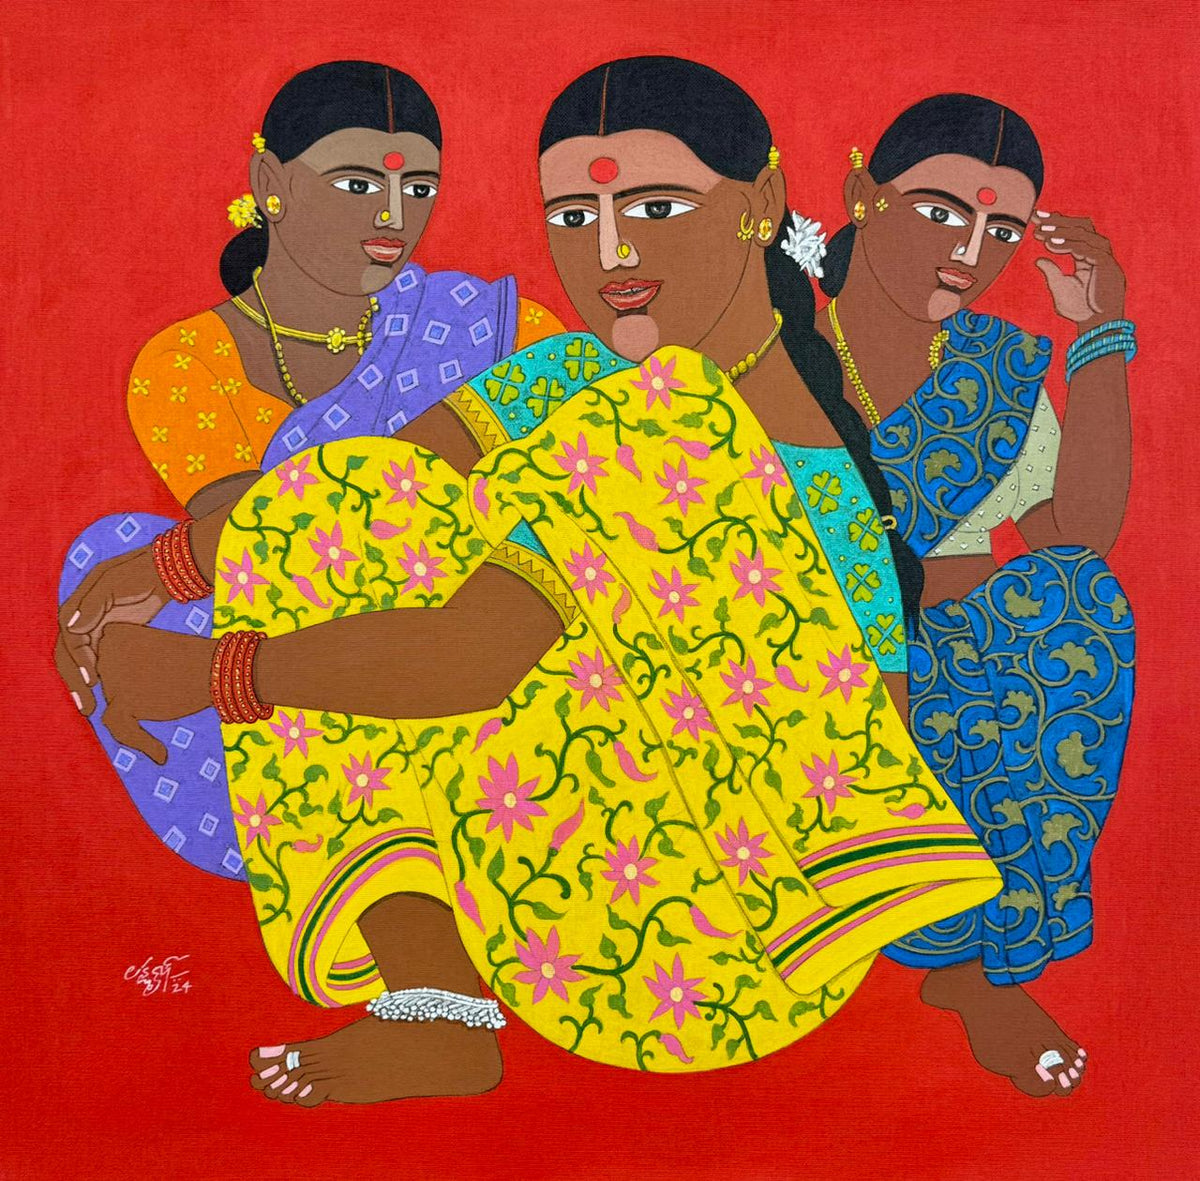 The portrayal of women as a representation of the goddess Poolamma, derived from this native Bathukamma festivity. Featuring three women from Telangana